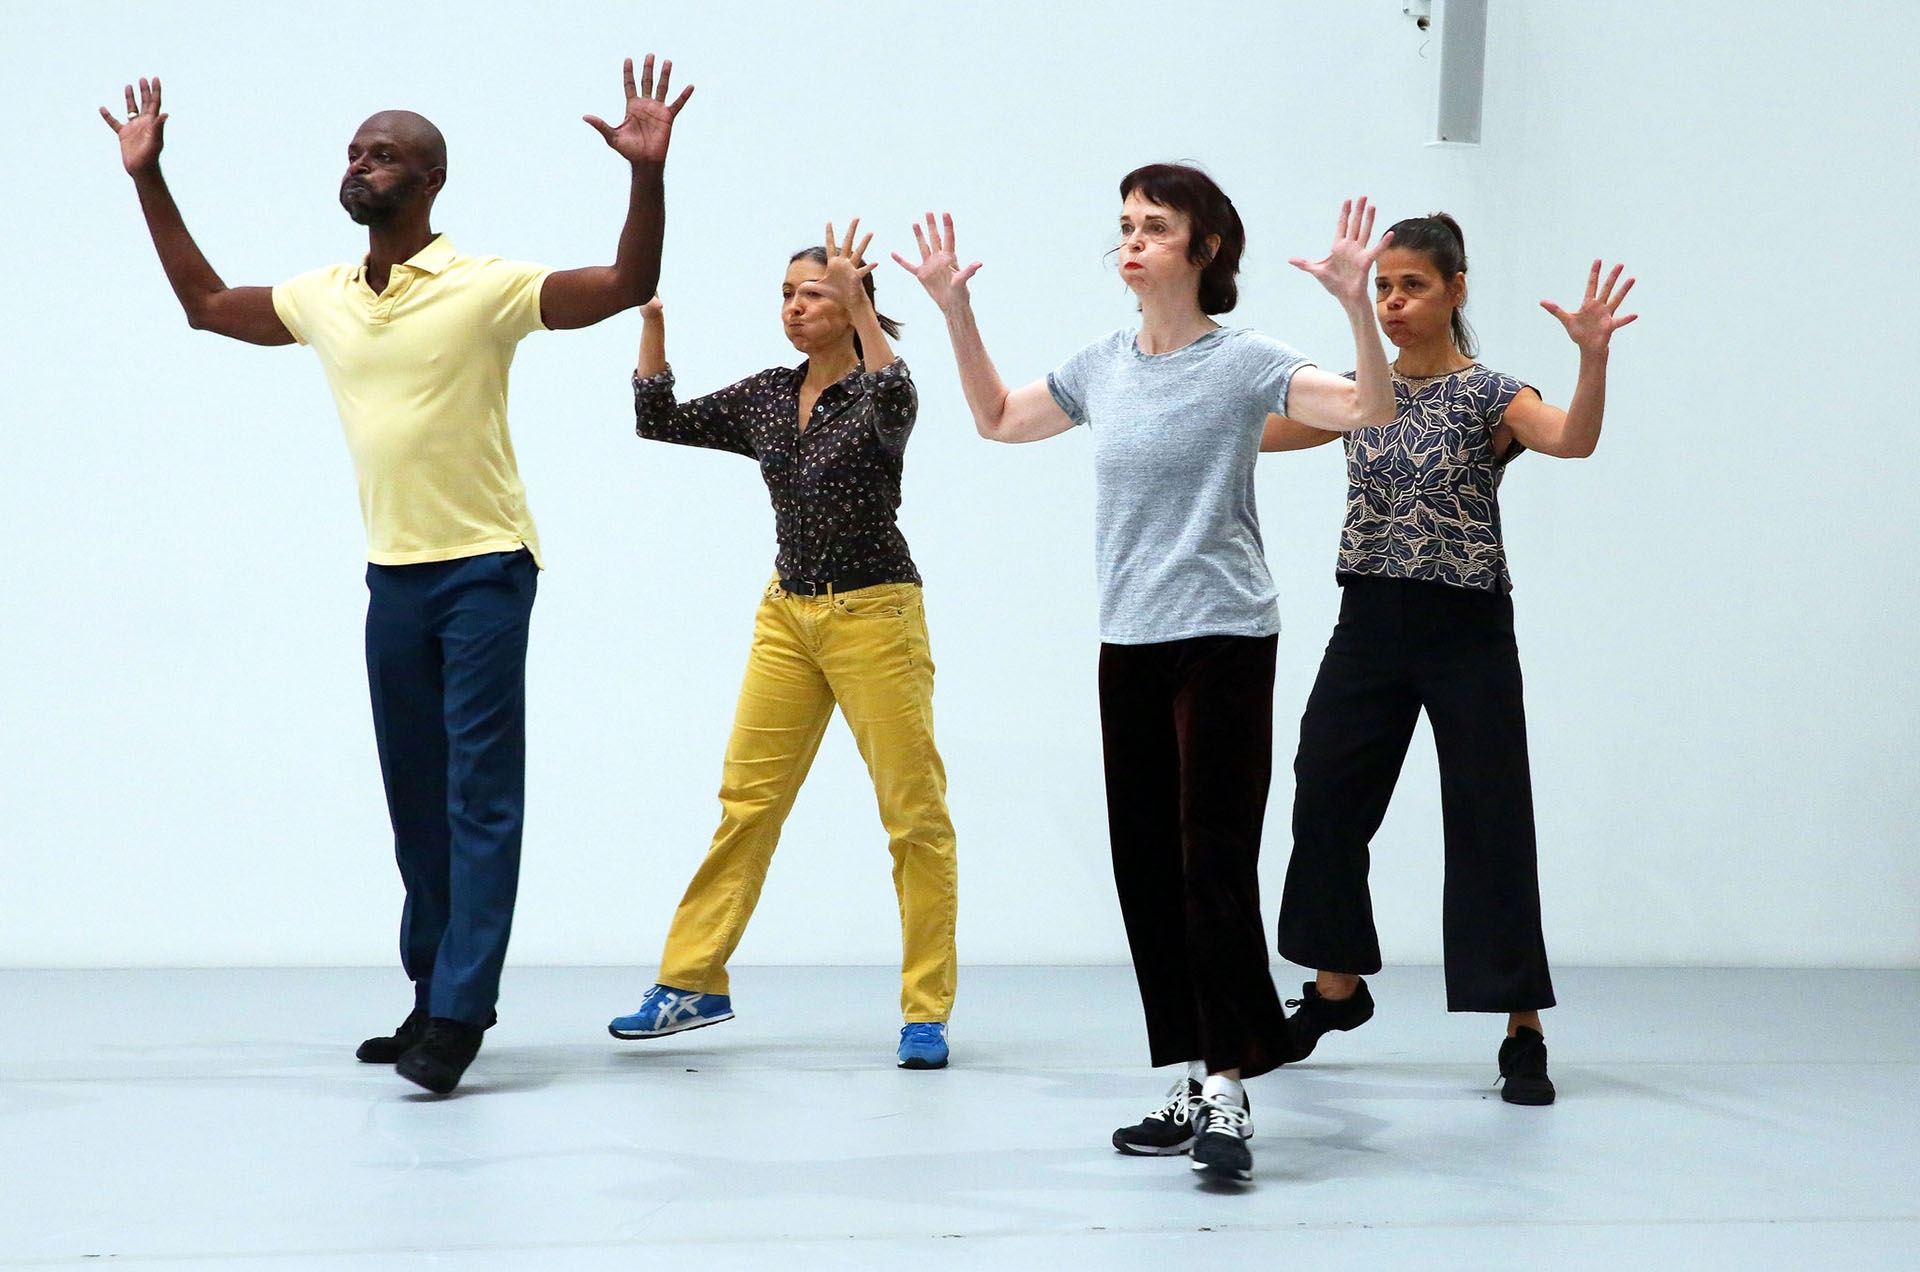 From left, David Thomson, Emanuele Phuon, Pat Catterson and Patricia Hoffbauer in Yvonne Rainer’s “Diagonal (From Terrain).” Photo Credit: Andrea Mohin/The New York Times